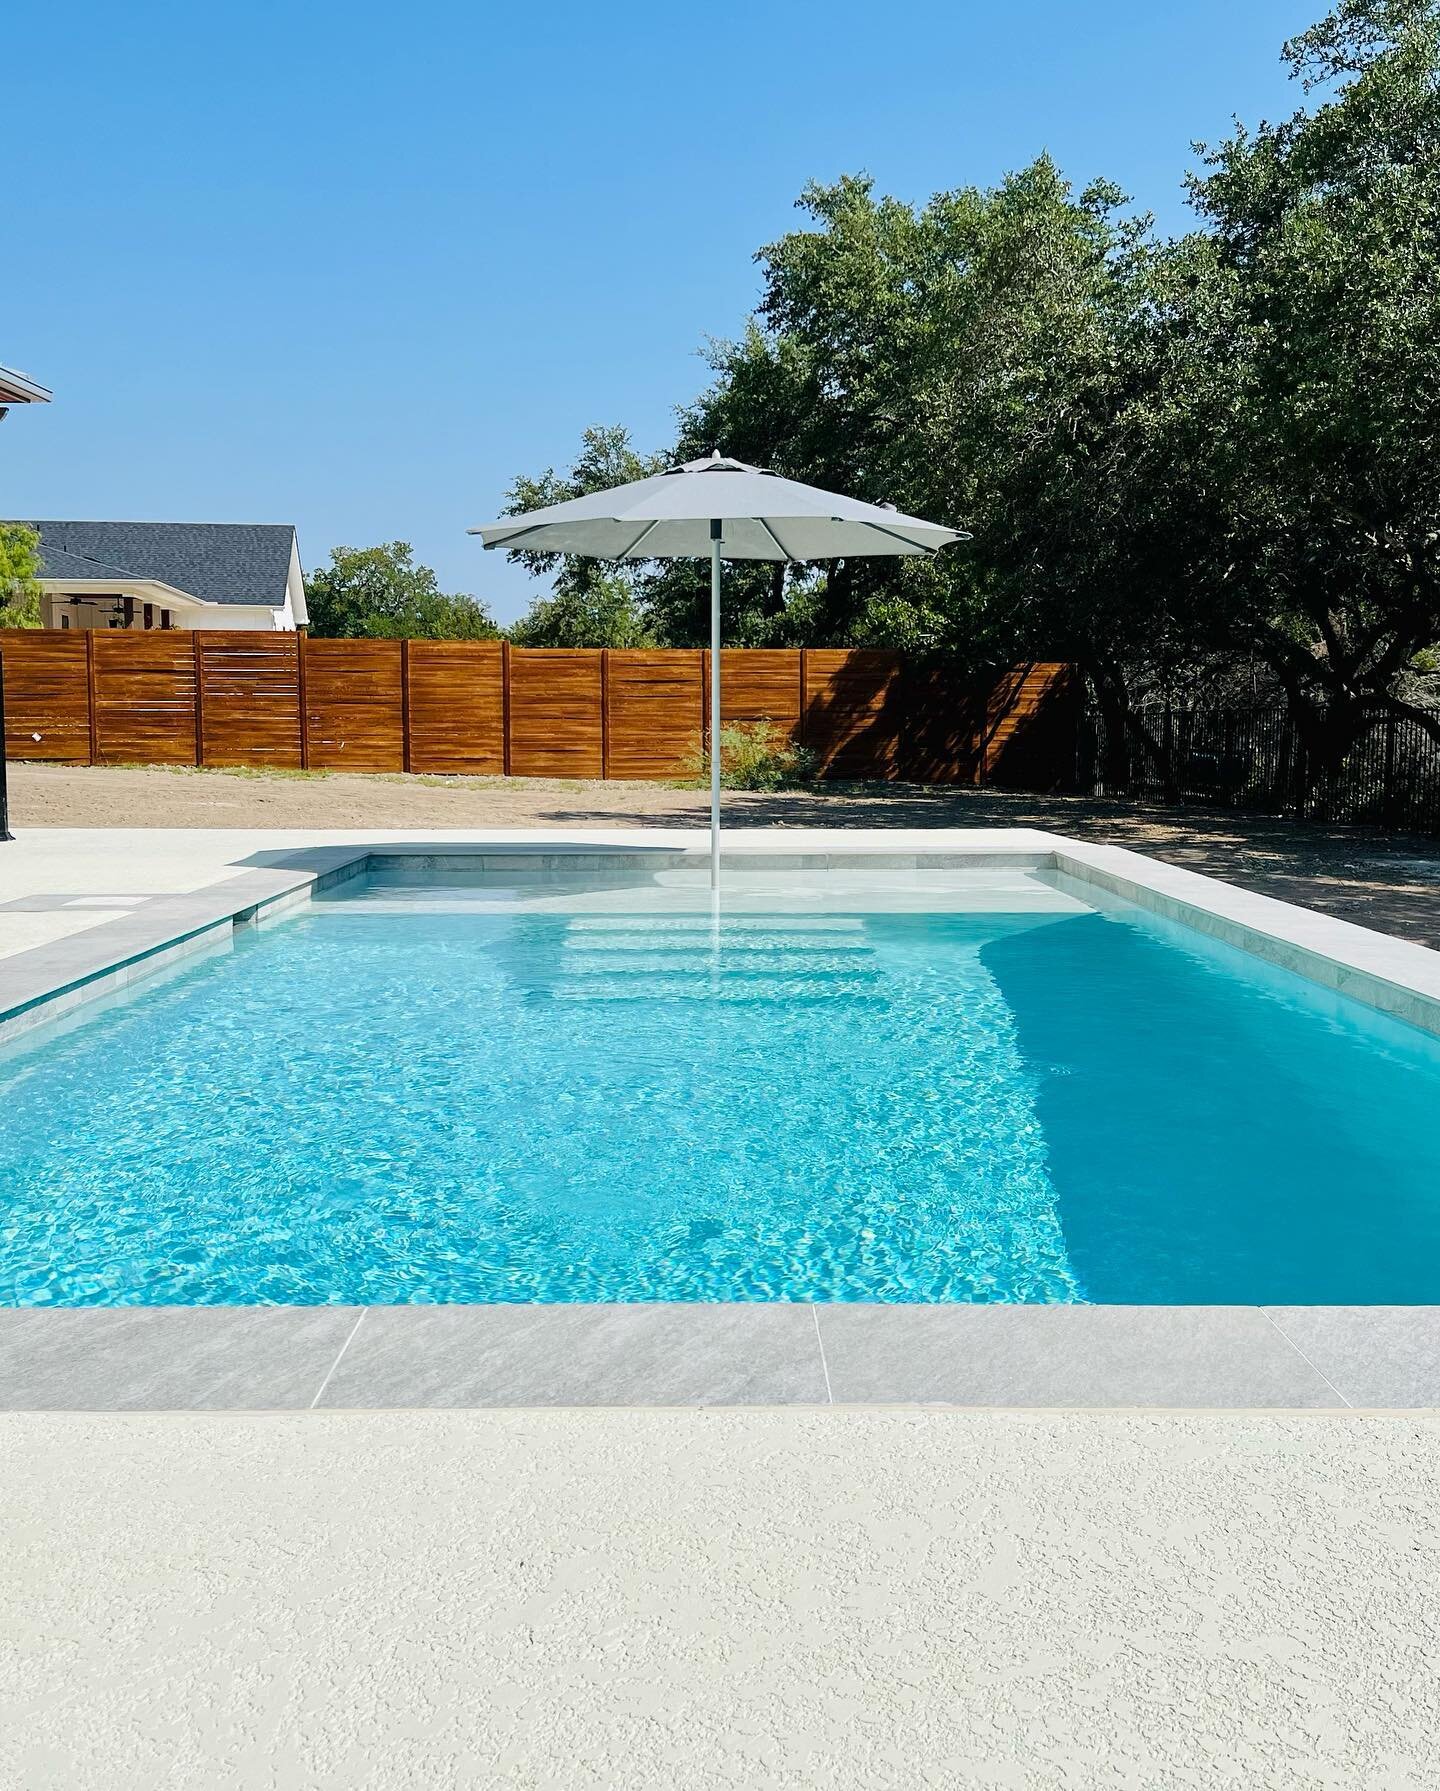 Check out our latest cocktail pool that is all about coordinating with the impeccably designed prairie style home it was built for. 

The homeowner went with stone-look tile and coping that blended seamlessly with the stone on the house. It turned ou